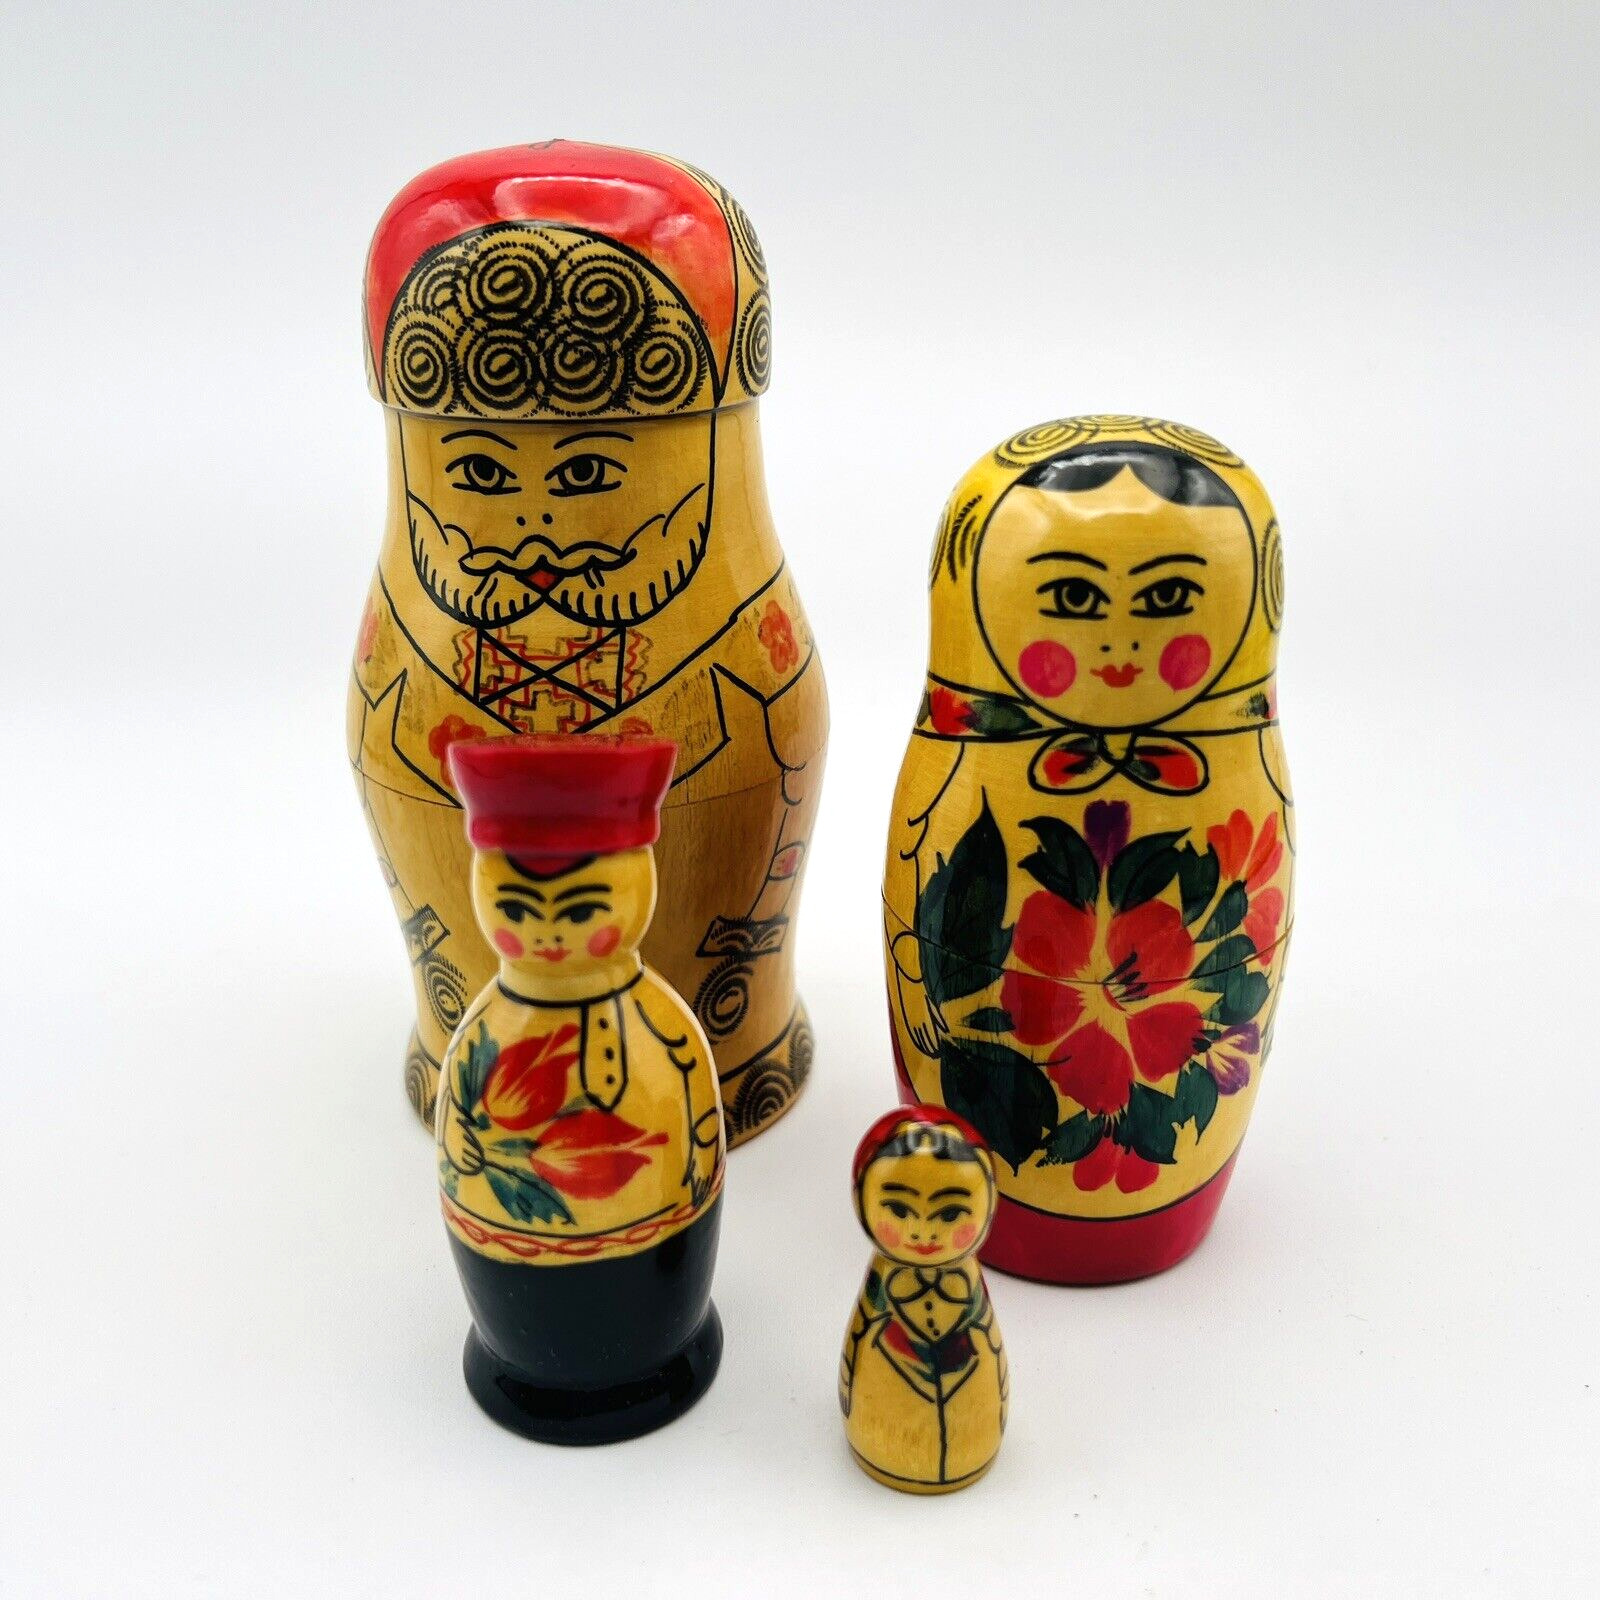 Russian Wooden Hand Painted Nesting Dolls 4 Pieces Family Made in USSR Vintage